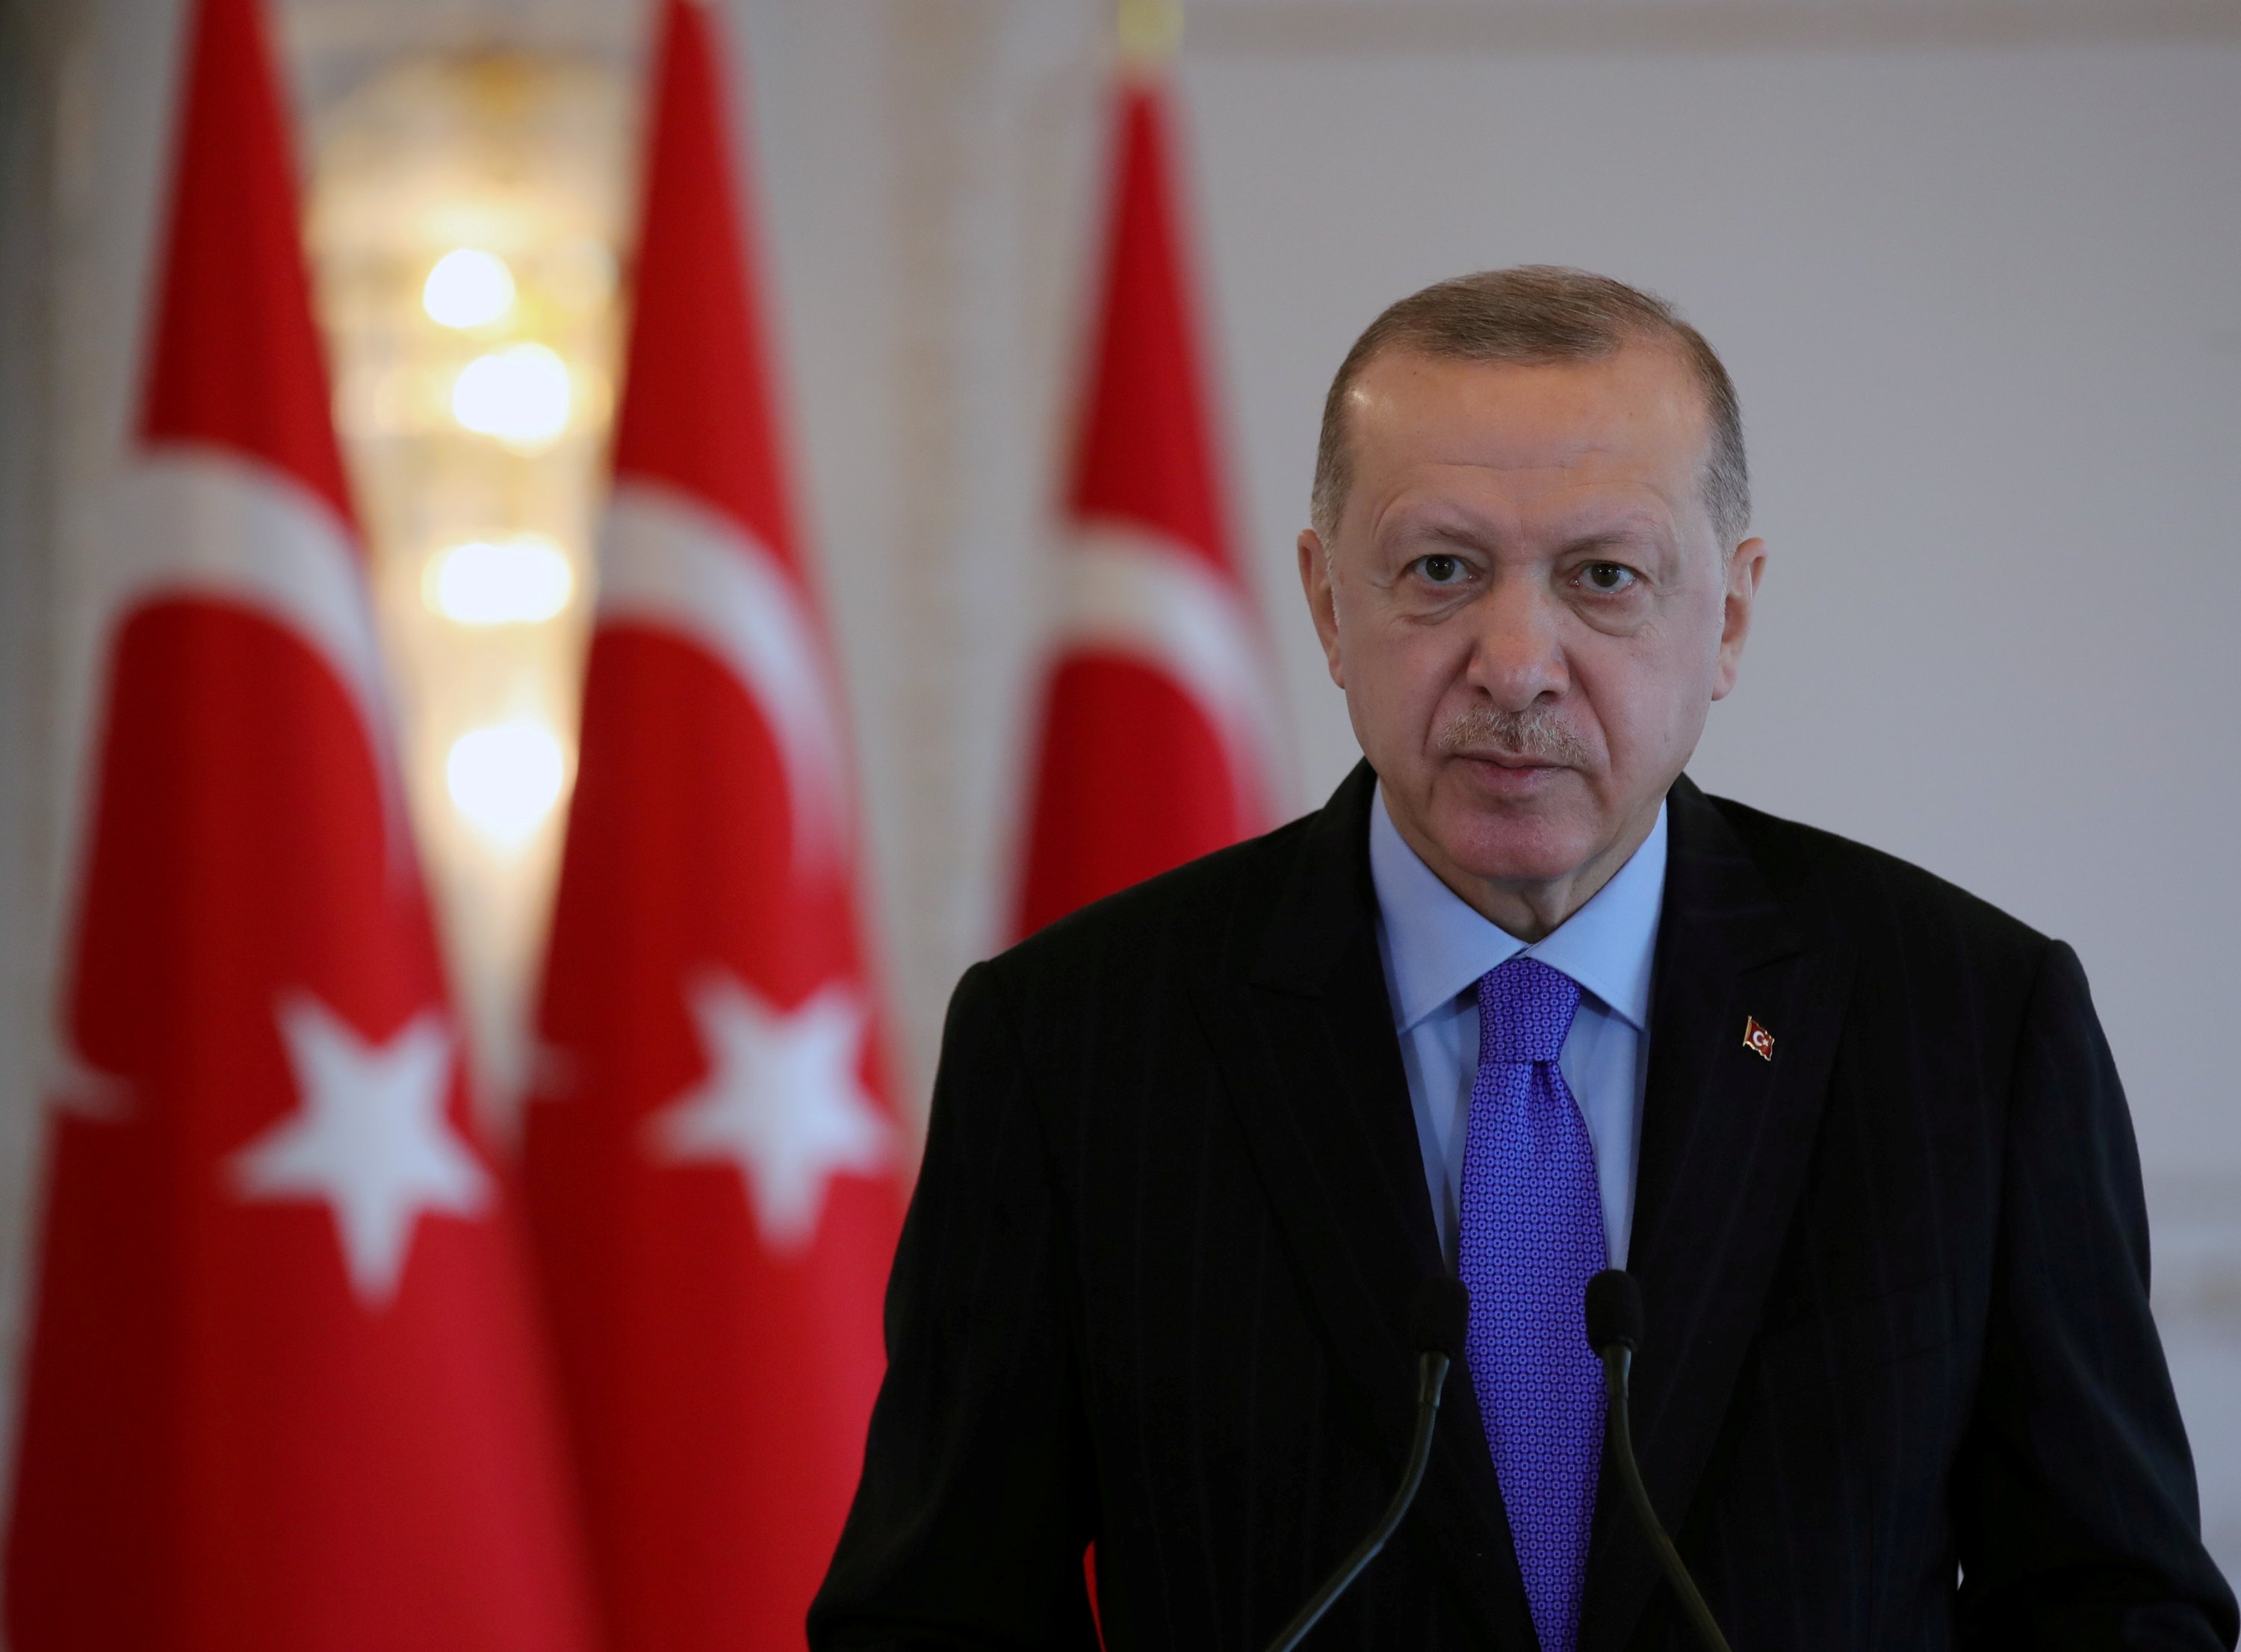 Doors open to all for new Constitution in Turkey, Erdoğan says Daily